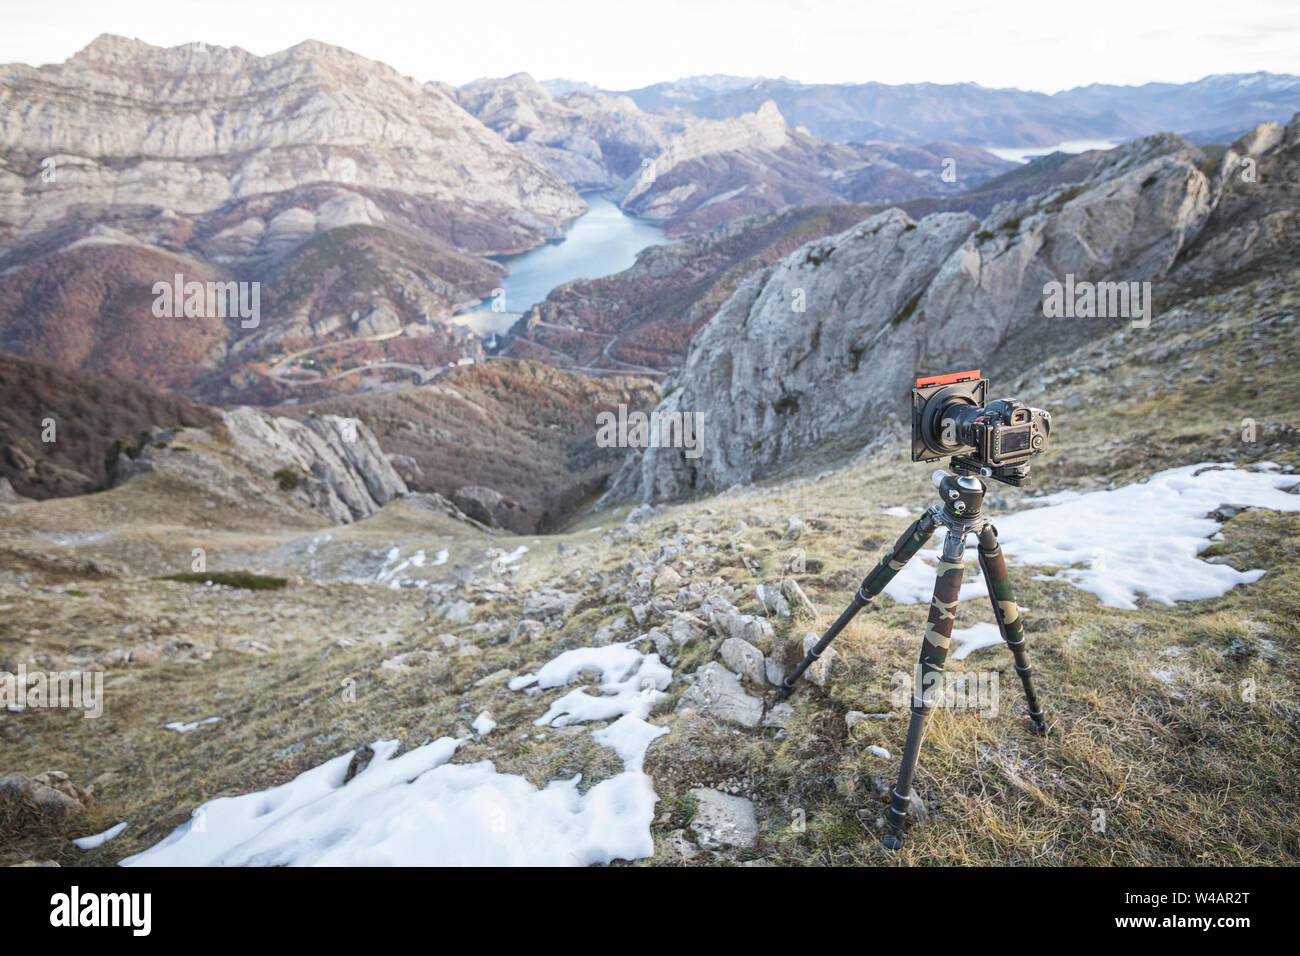 mountain view with camera in live mode Stock Photo